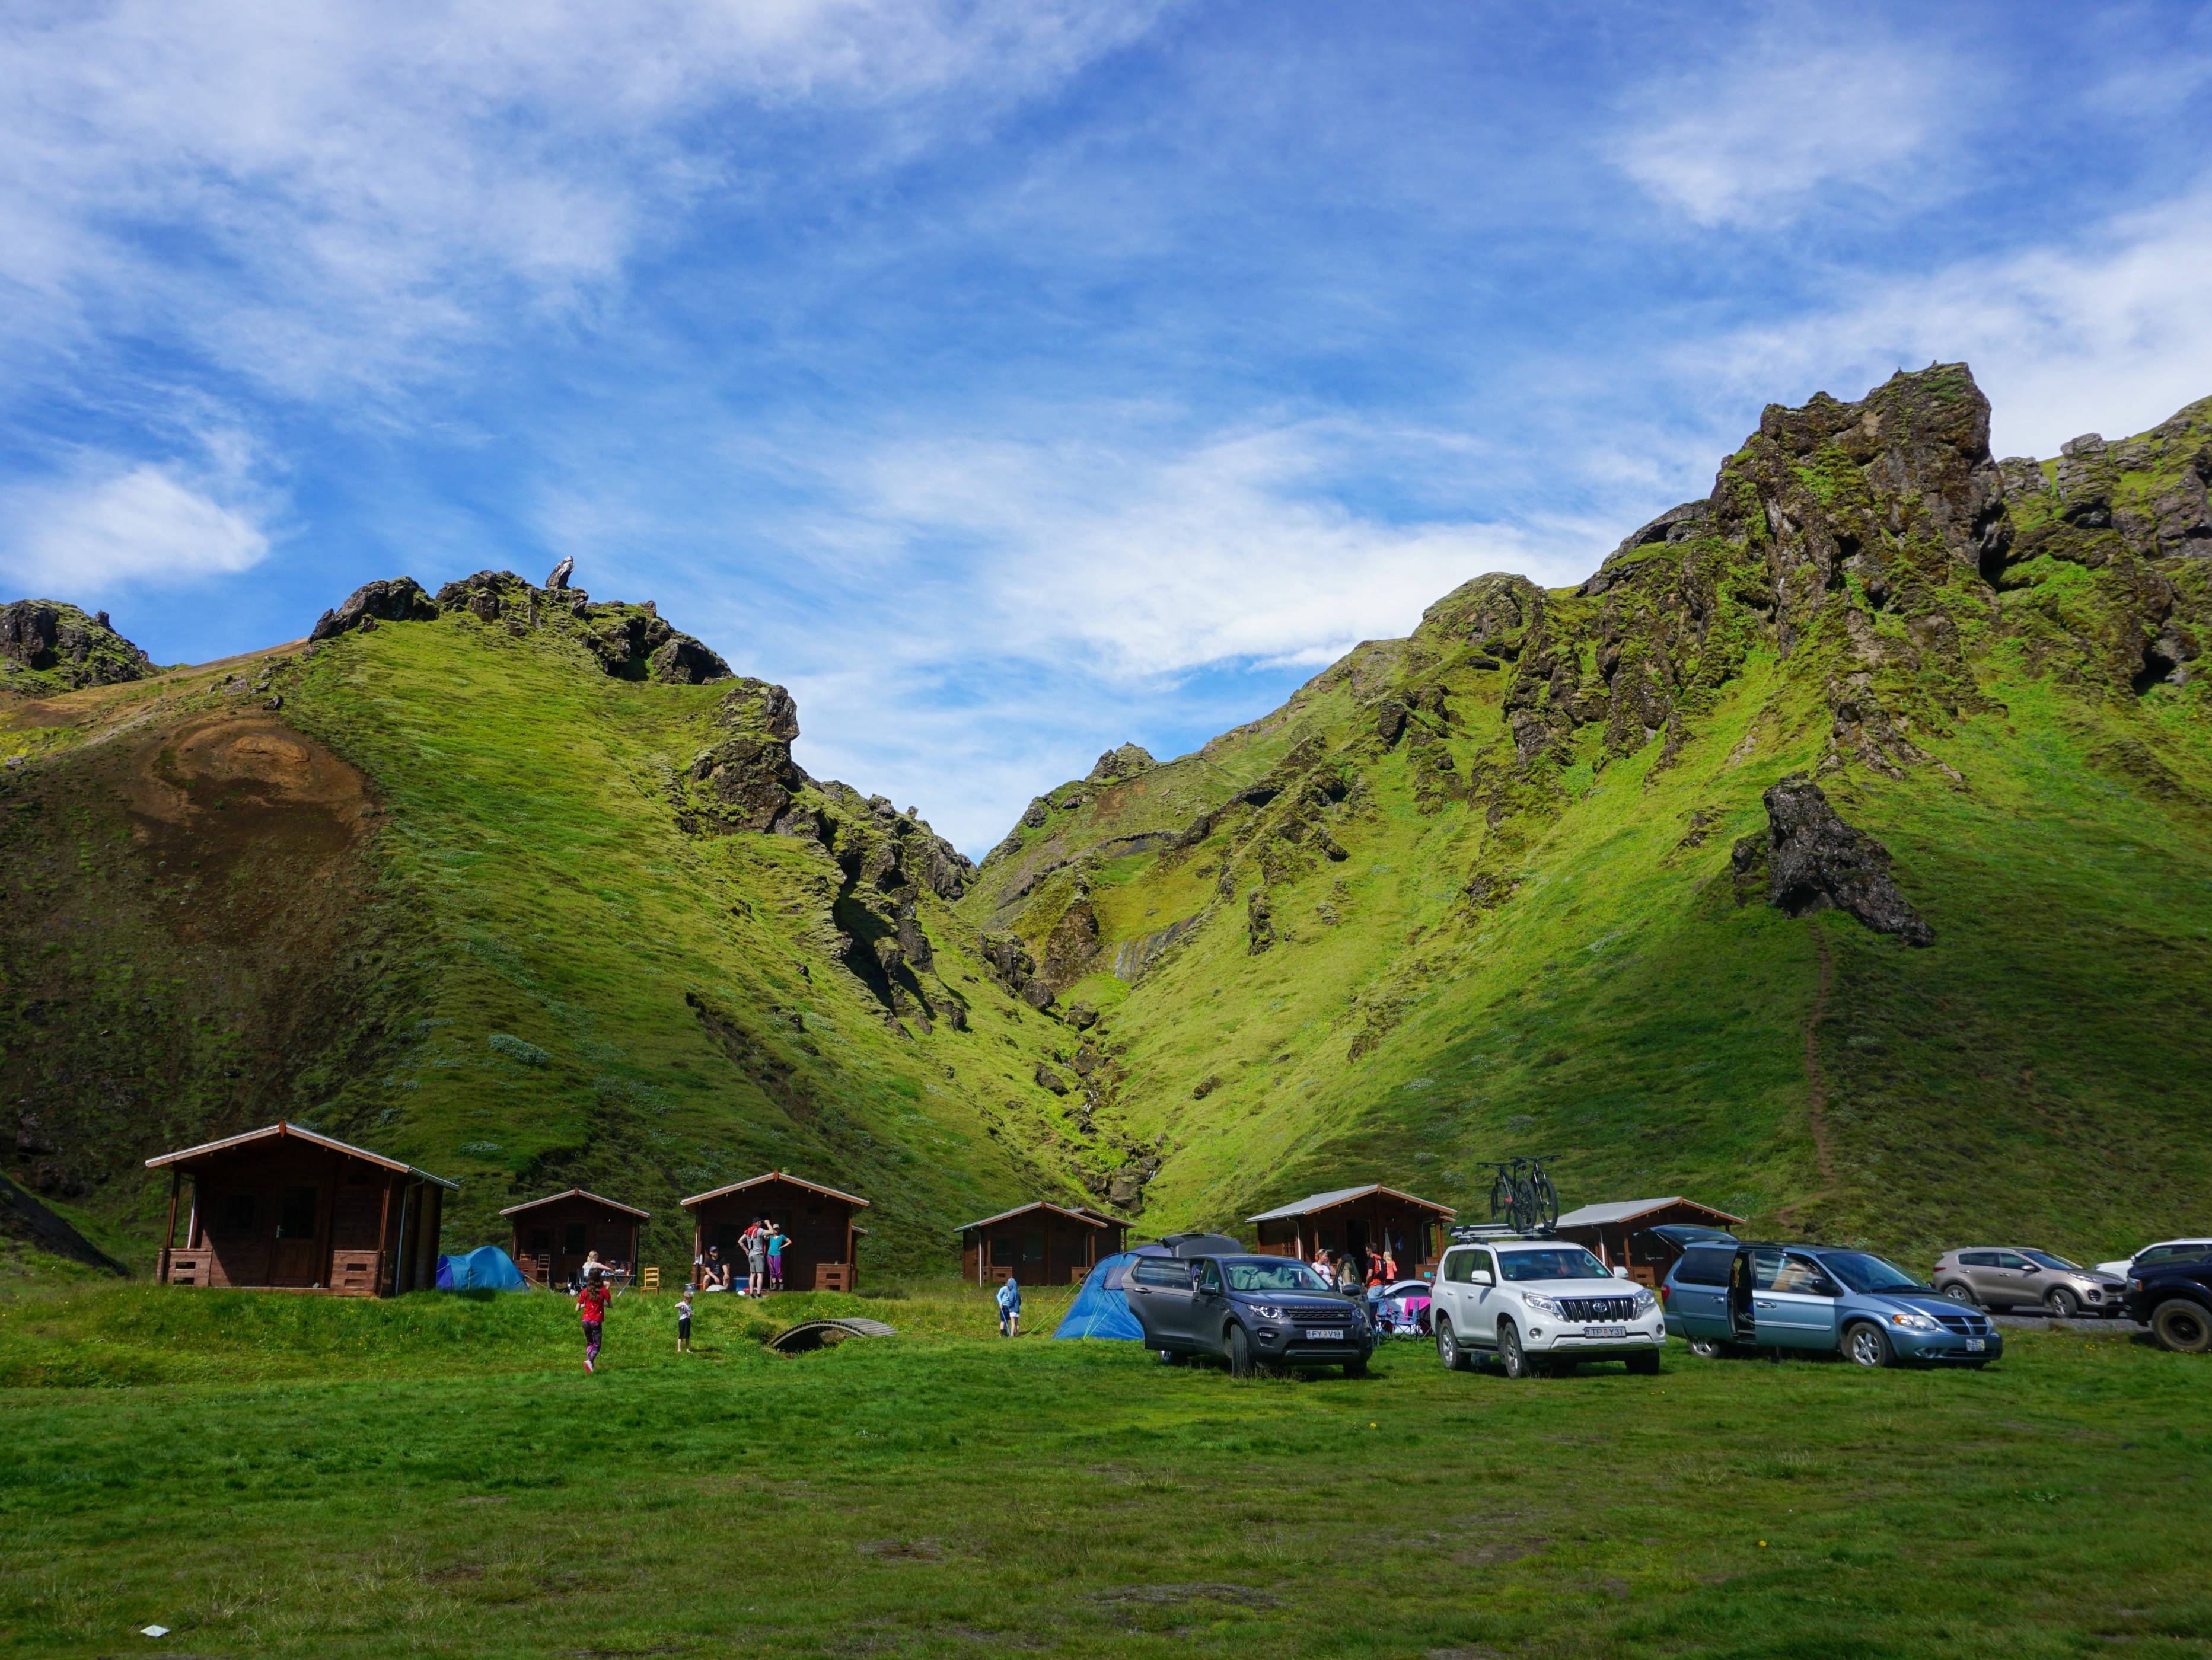 campsite-full-of-people-tents-vehicles-and-a-few-small-cabins-in-Iceland-in-summer-surrounded-by-green-mountains